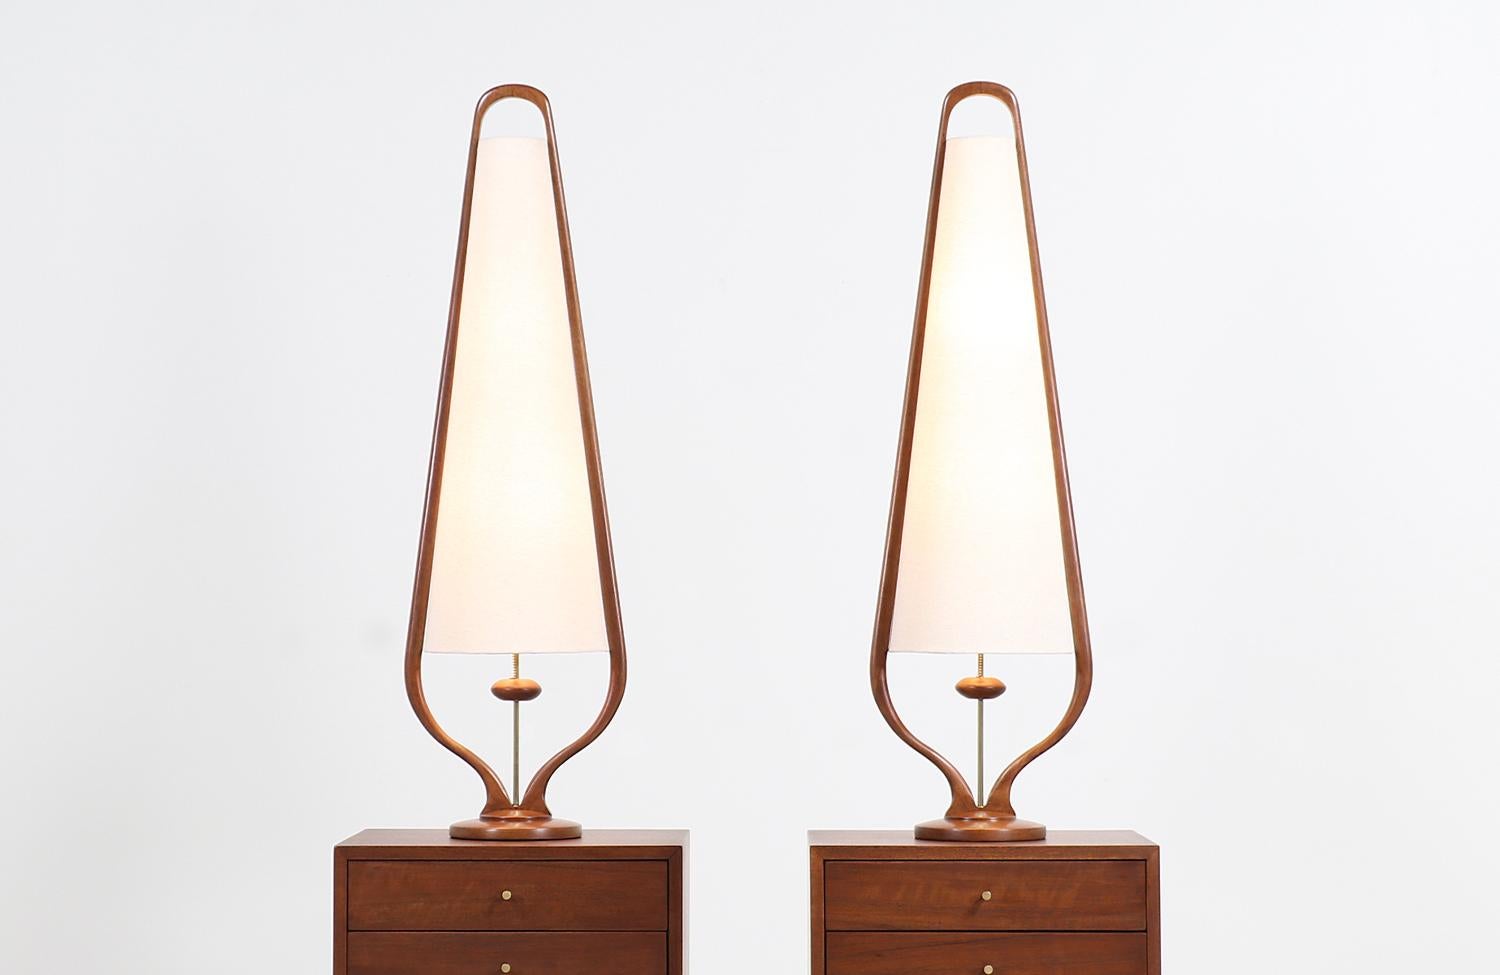 A stylish pair of modern table lamps designed and manufactured by Modeline of California in the United States, circa 1960s. These tall table lamps feature a rounded walnut wood base with a sculpted frame that embraces the new linen shade and